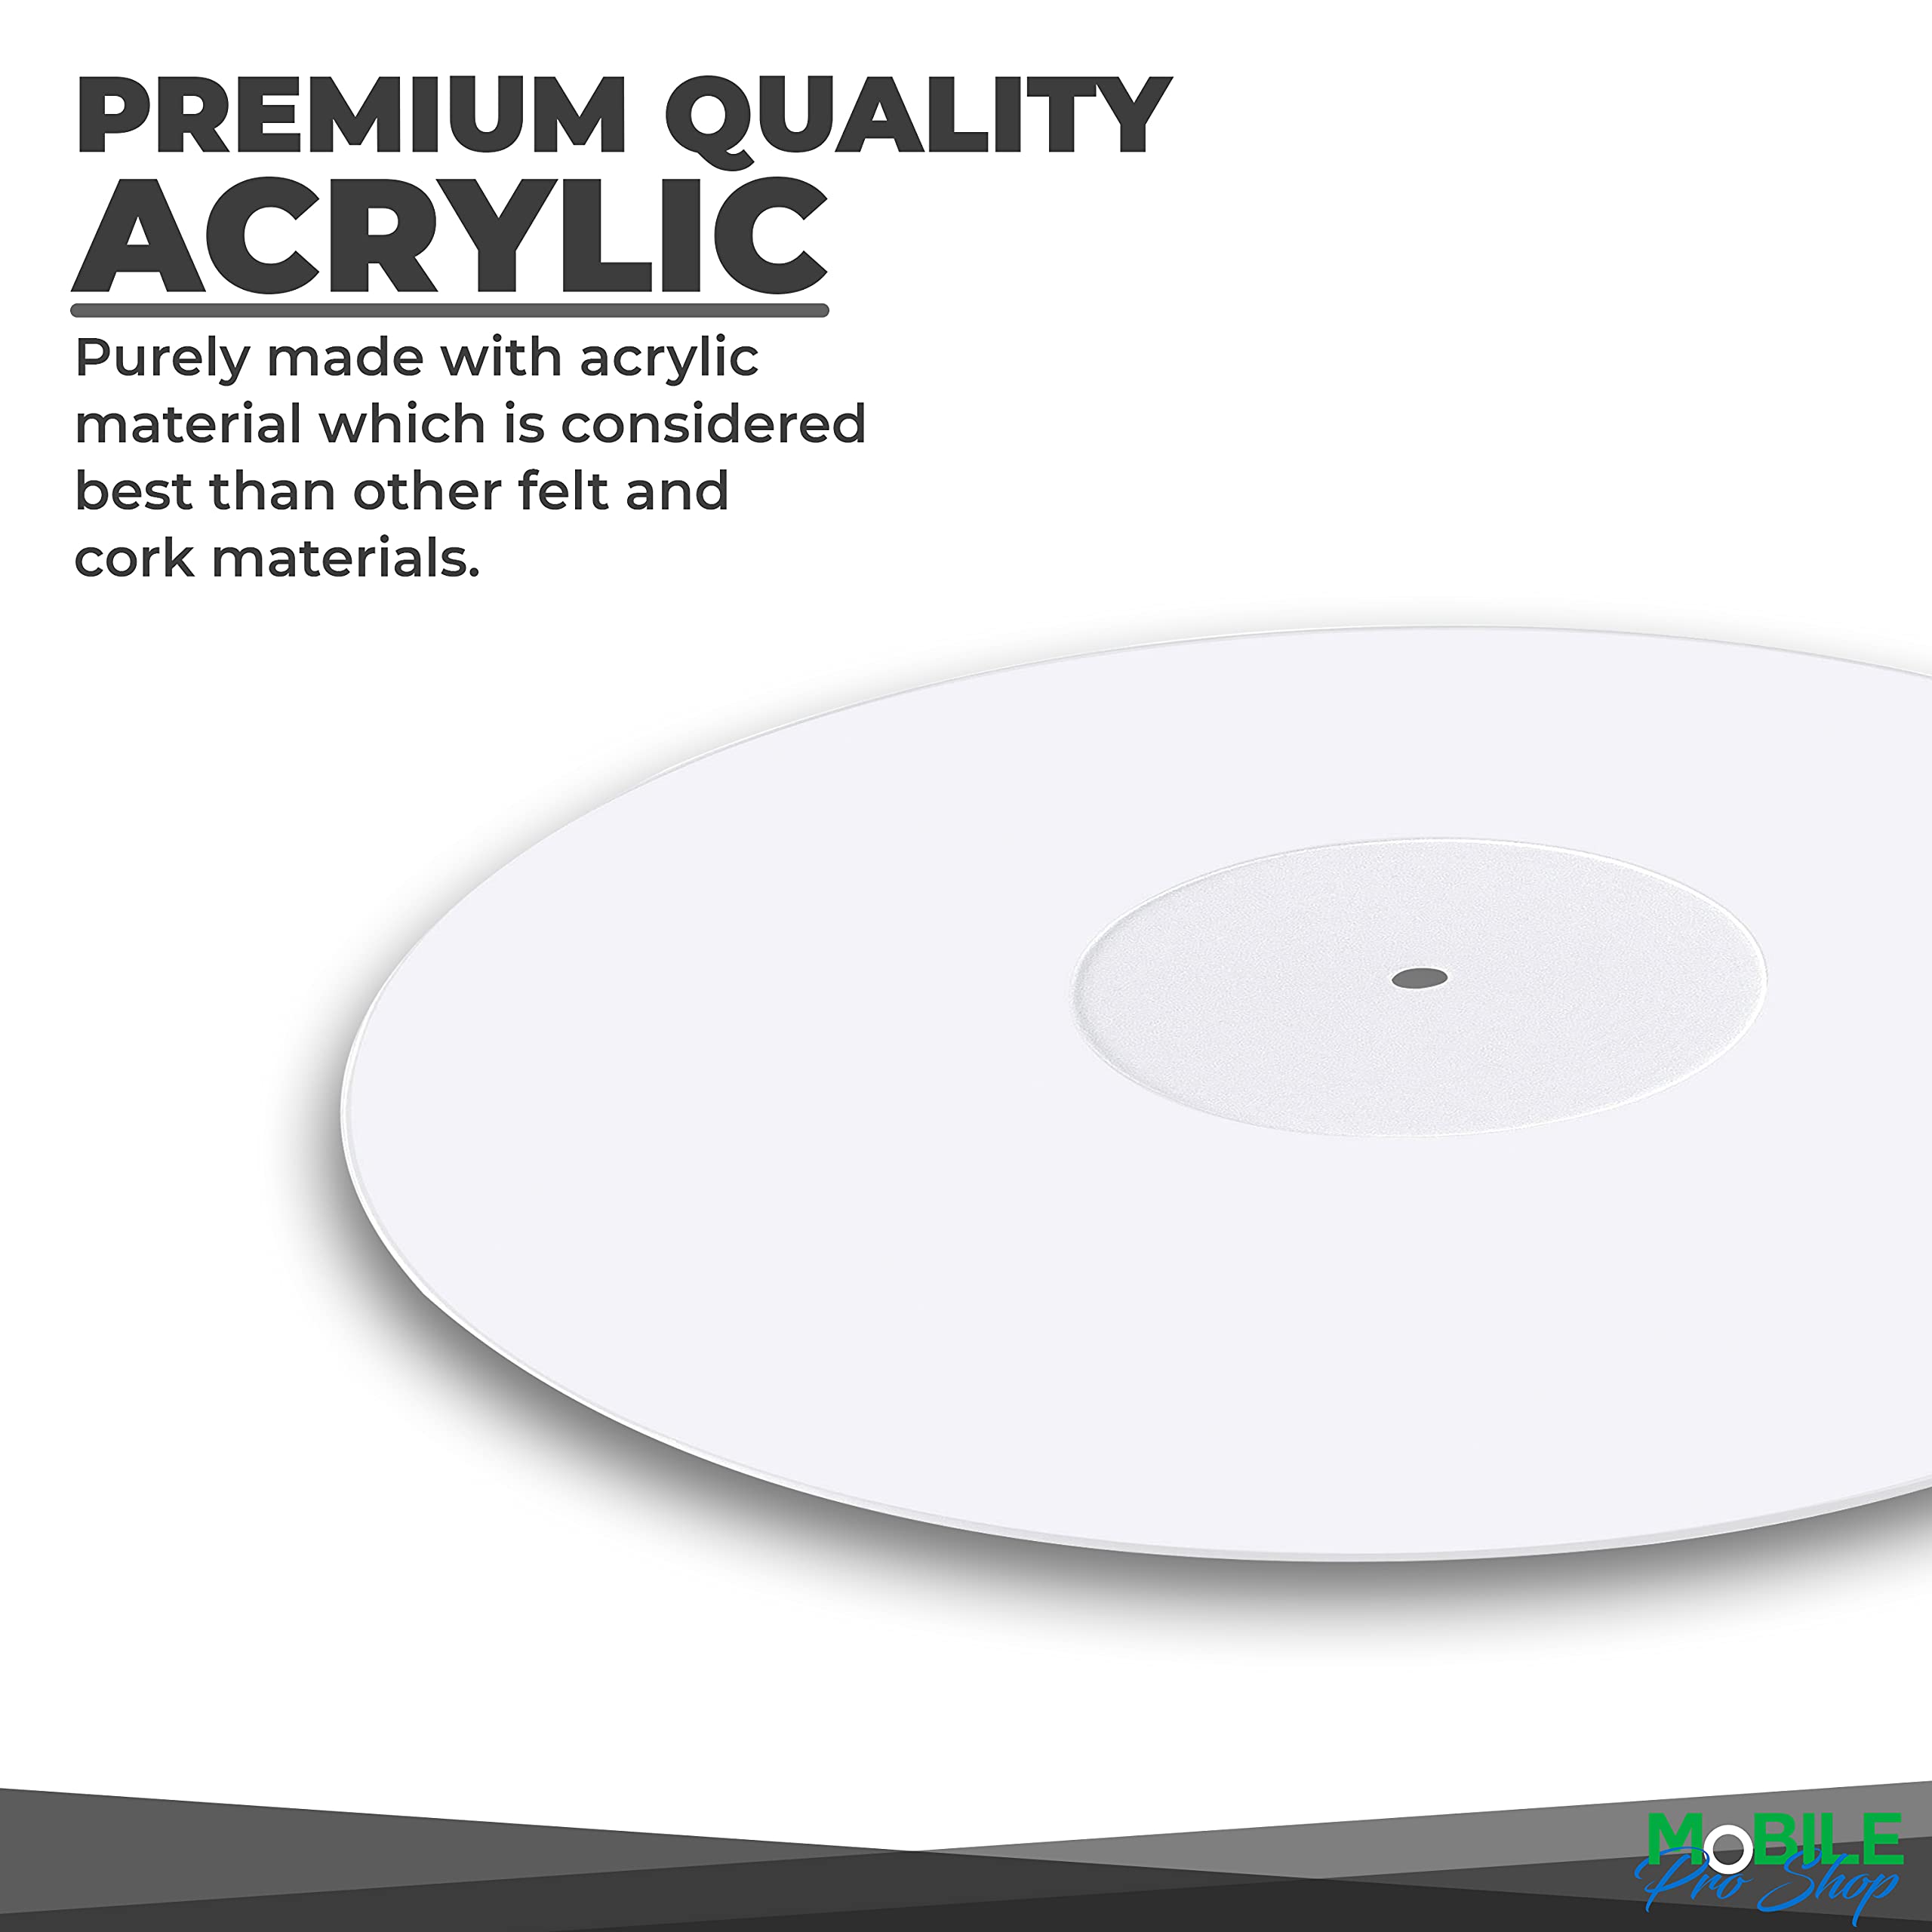 Mobile Pro Shop Acrylic Turntable Mat - Acrylic Slipmat for Vinyl LP Record Players - Improves Sound Quality & Provides Tighter Bass - Anti Static Platter mat (White)